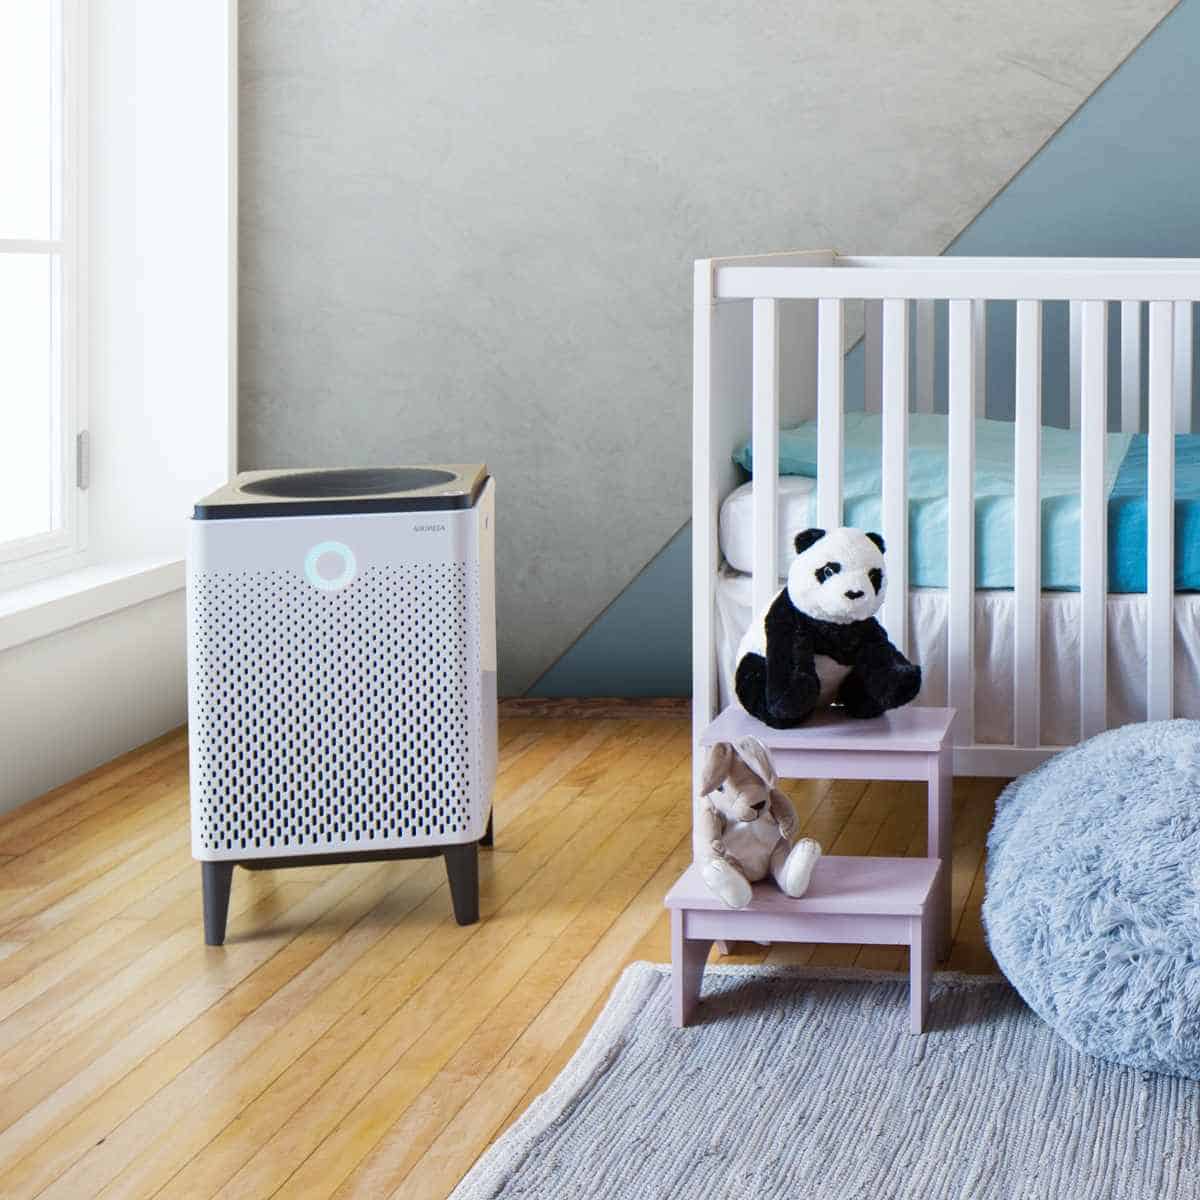 AIRMEGA 300 The Smarter Air Purifier | Top Gadgets To Speed Up Your Spring Cleaning